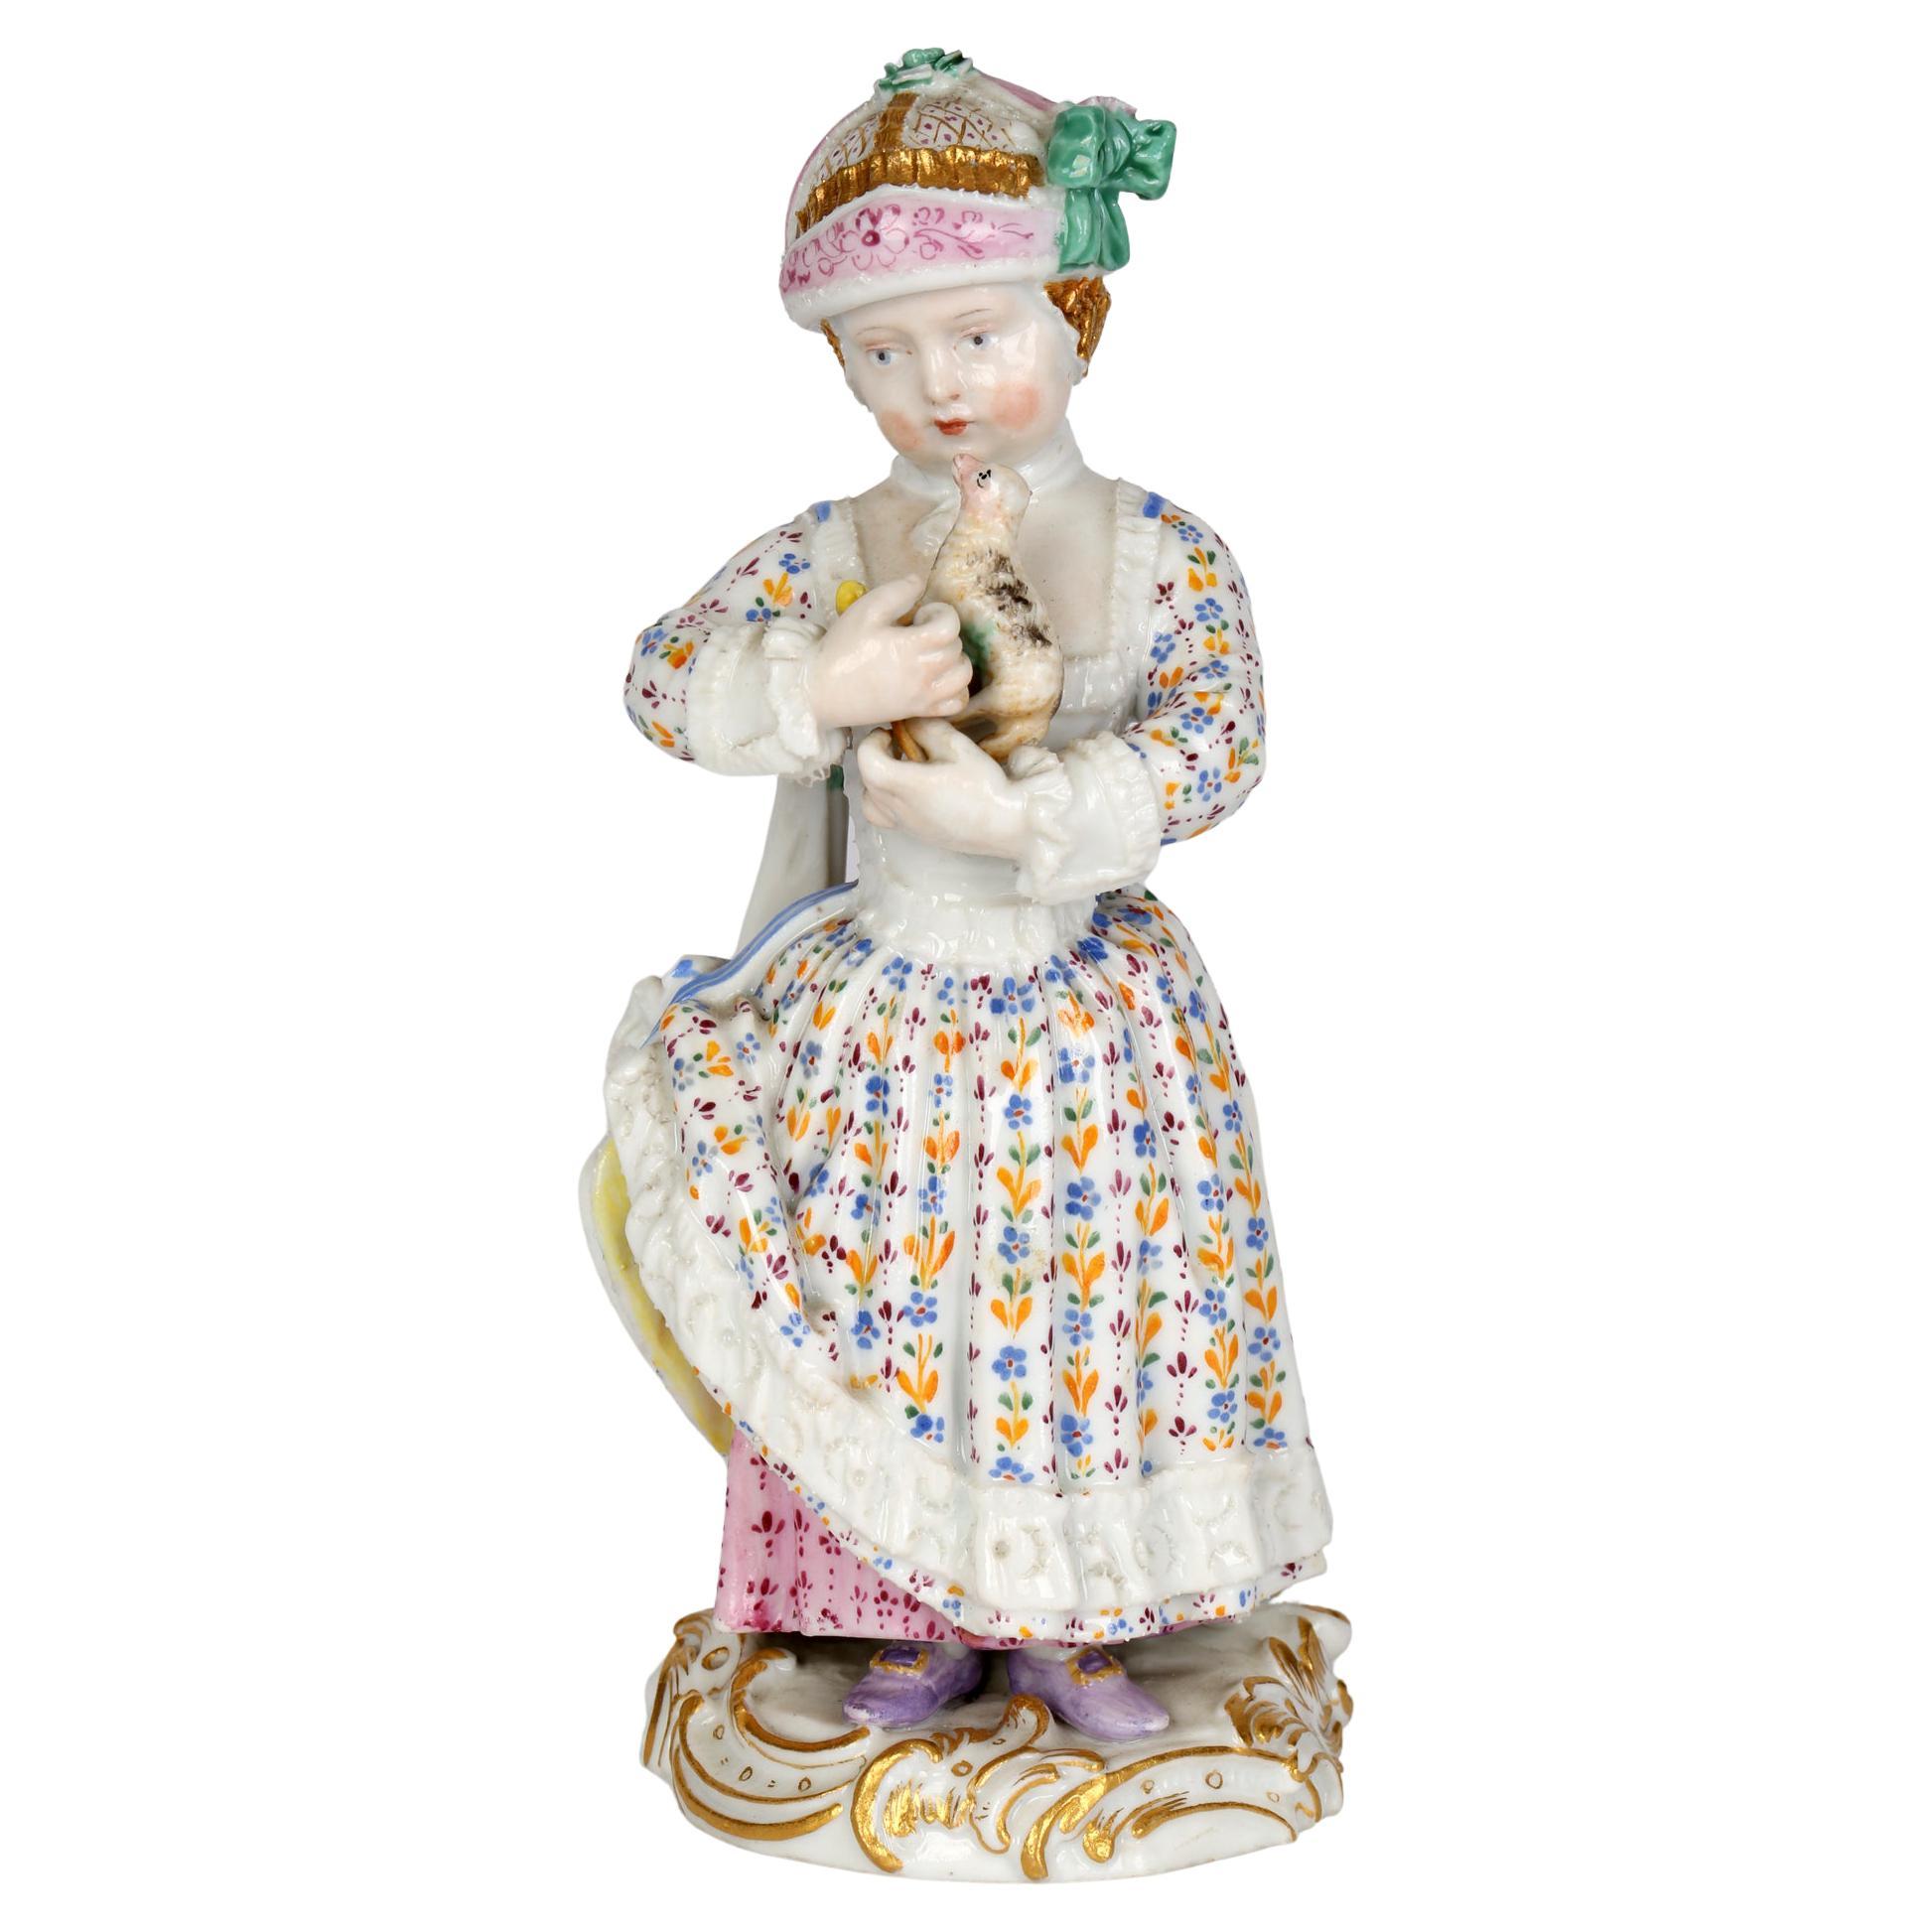 Meissen Porcelain Figurine of a Young Girl Holding a Pull Along Animal Toy